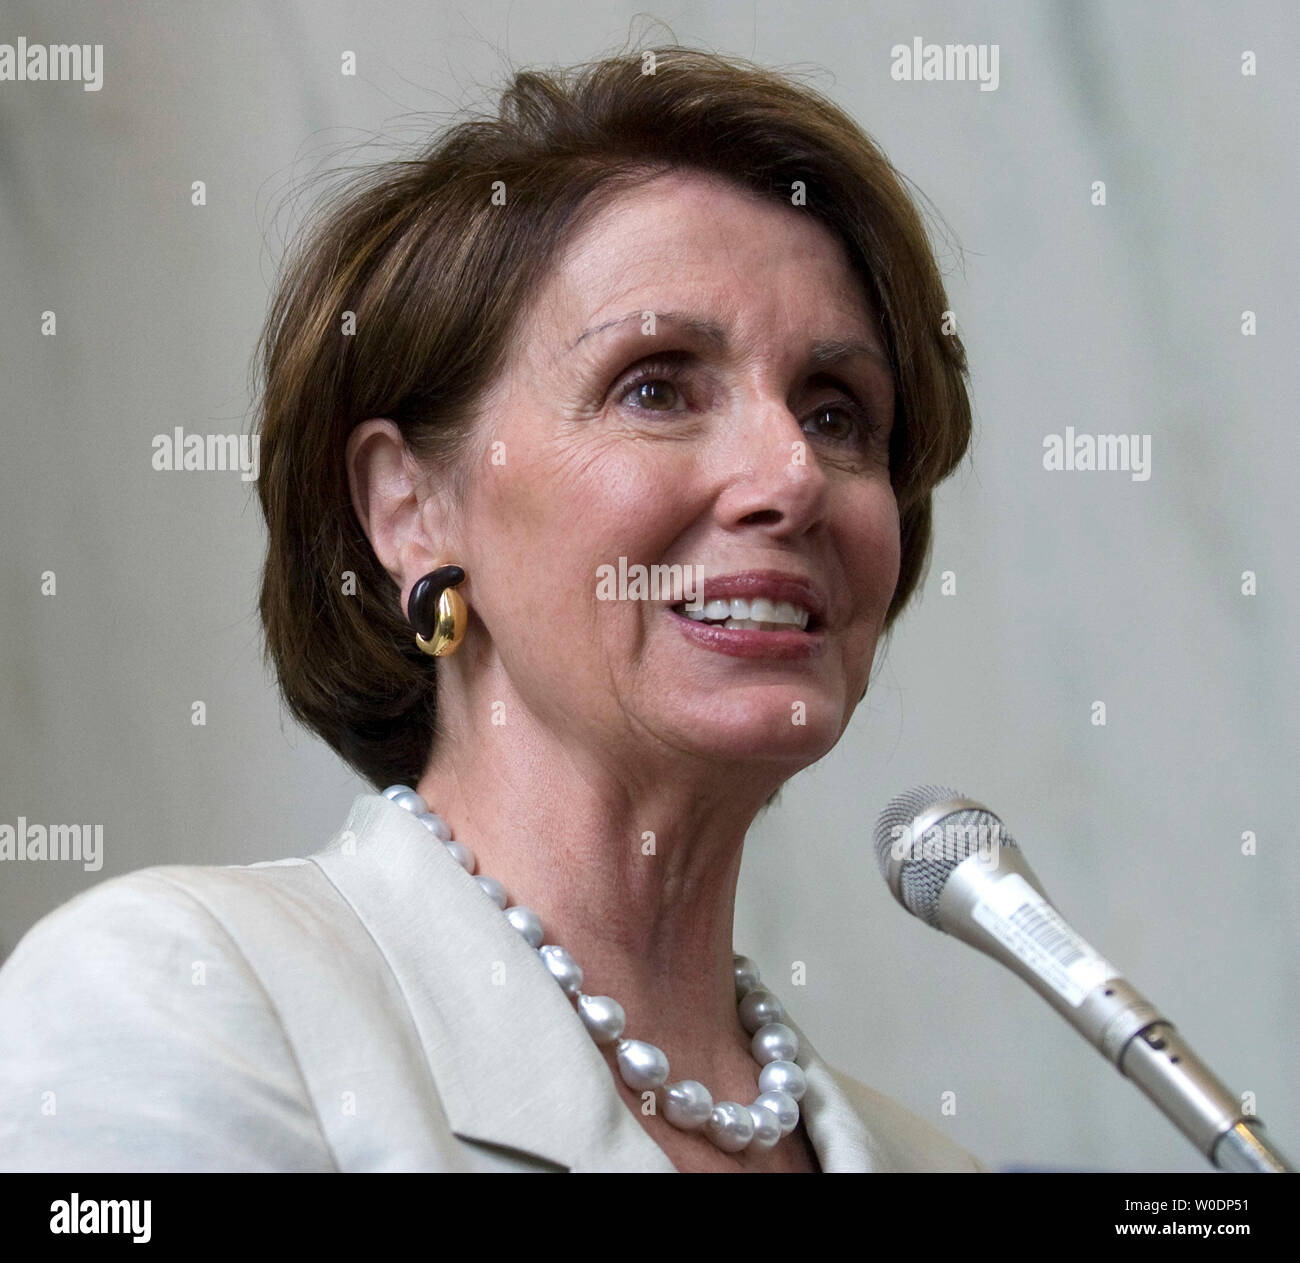 Speaker of the House Nancy Pelosi (D-CA) speaks at the 'Capitol PurSuit' event on Capitol Hill in Washington on June 27, 2007. Lobbyists and members of Congress donated suits and dress clothes to families in need.(UPI Photo/Dominic Bracco II) Stock Photo